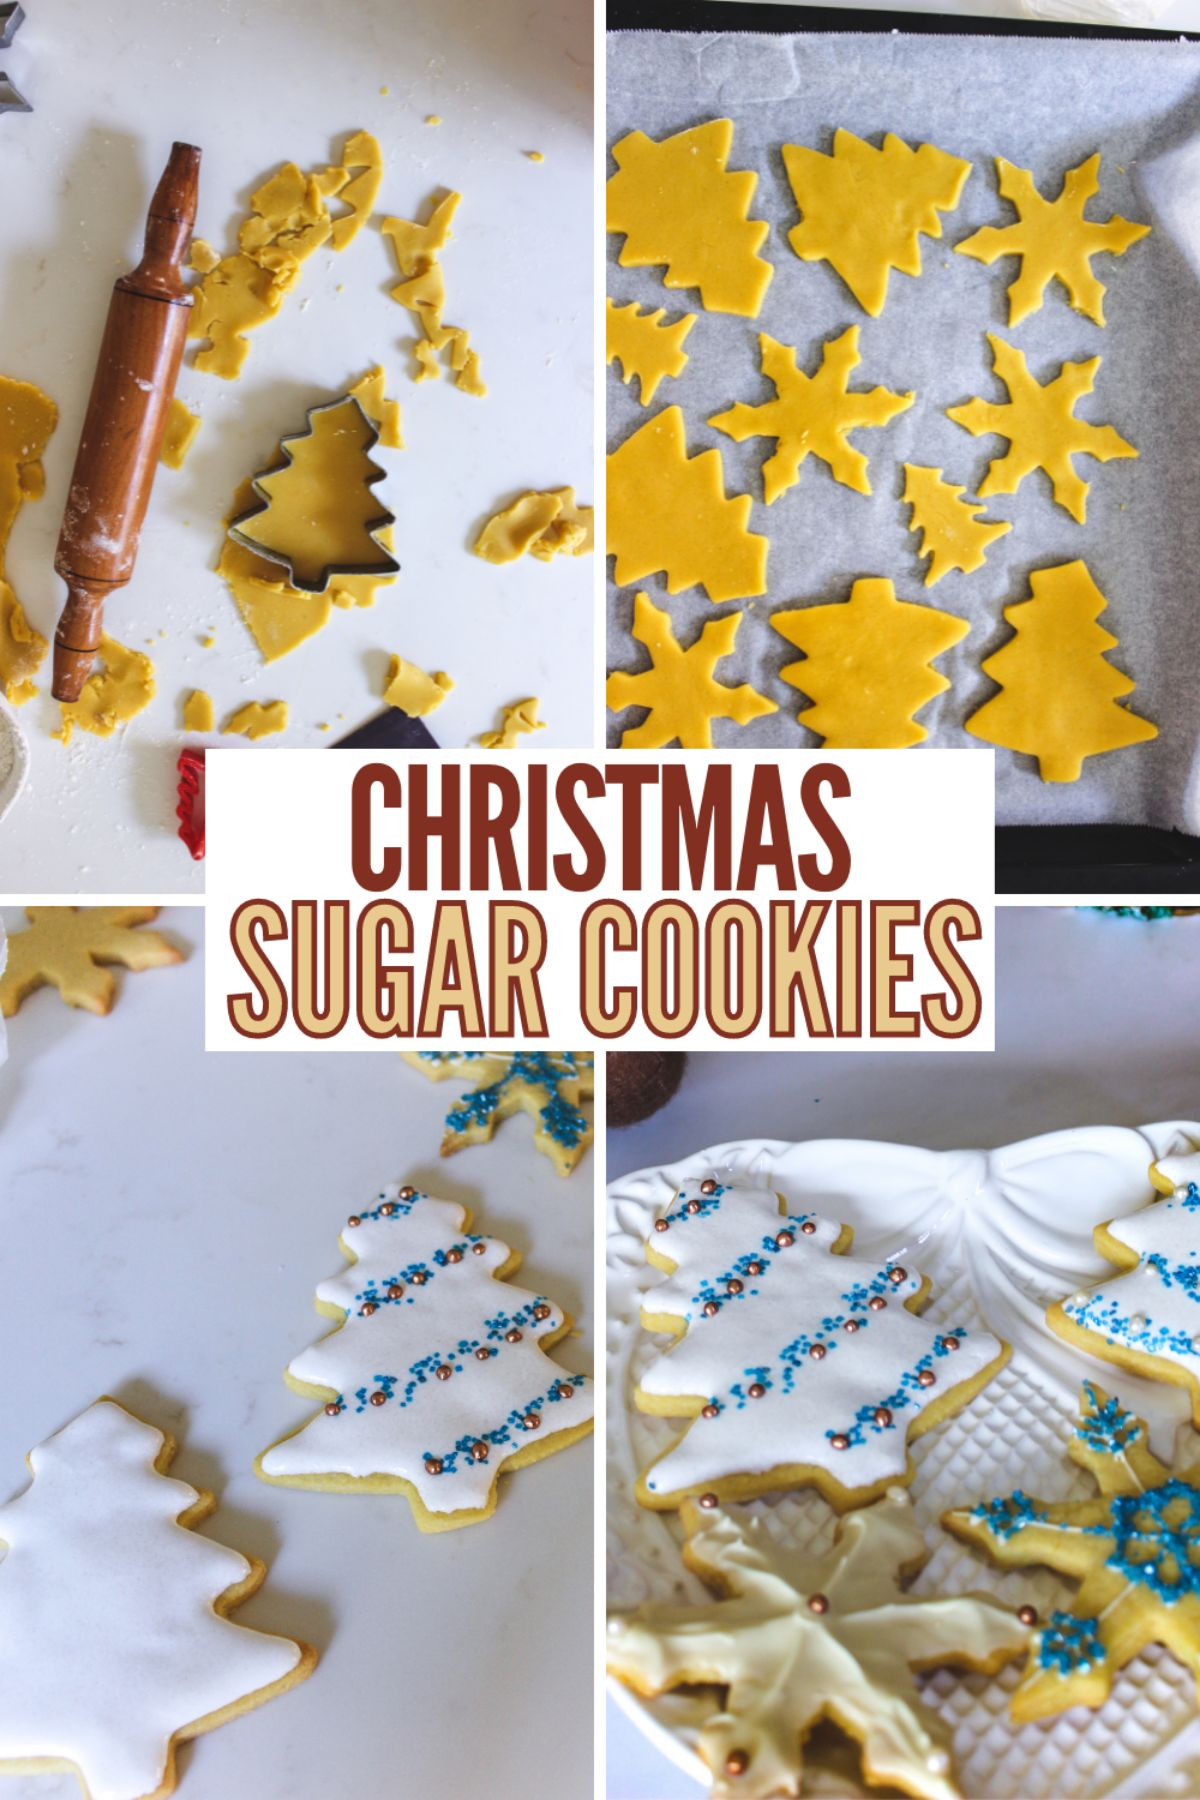 This Christmas Sugar Cookies recipe is my favorite roll-out sugar cookies recipe. They're crispy on the outside and chewy in the center. #christmascookie #christmas #cookie #sugarcookie #recipe via @wondermomwannab